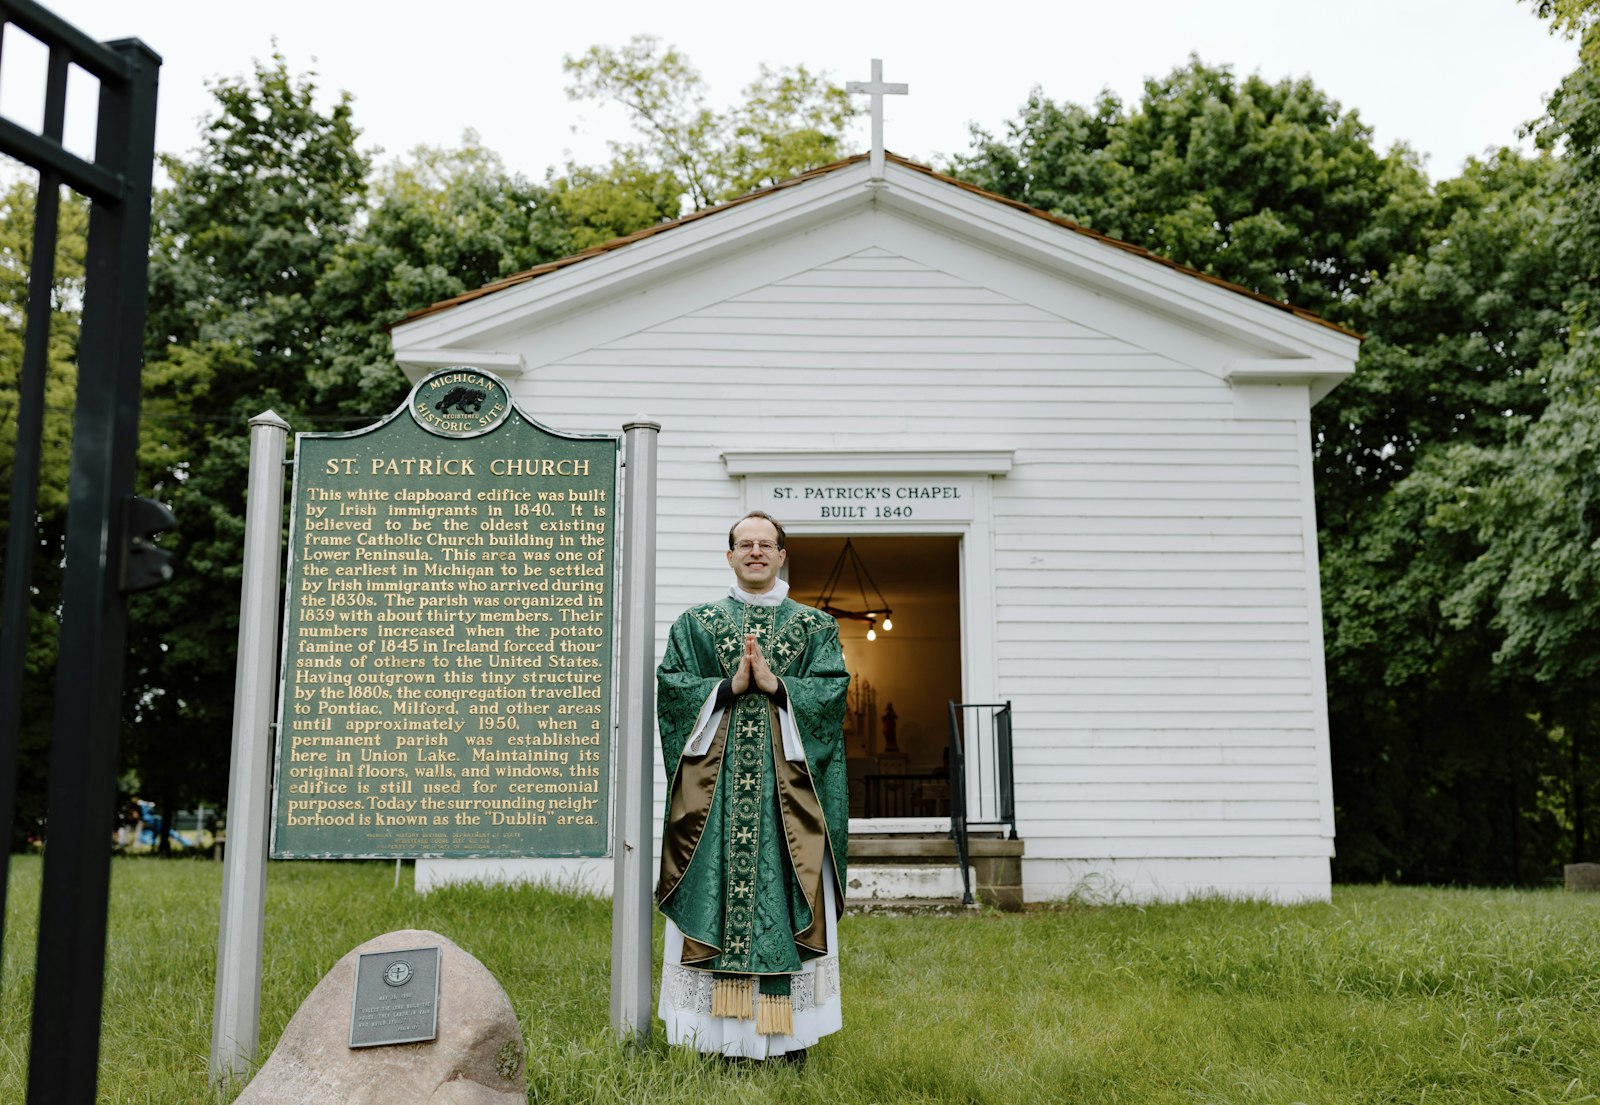 Fr. David Cybulski, moderator and priest in solidum at St. Patrick Parish, stands outside the historic 1840 chapel following Mass. For generations, priests at St. Patrick have cared for the humble historic site, the oldest Catholic structure in Michigan's Lower Peninsula.